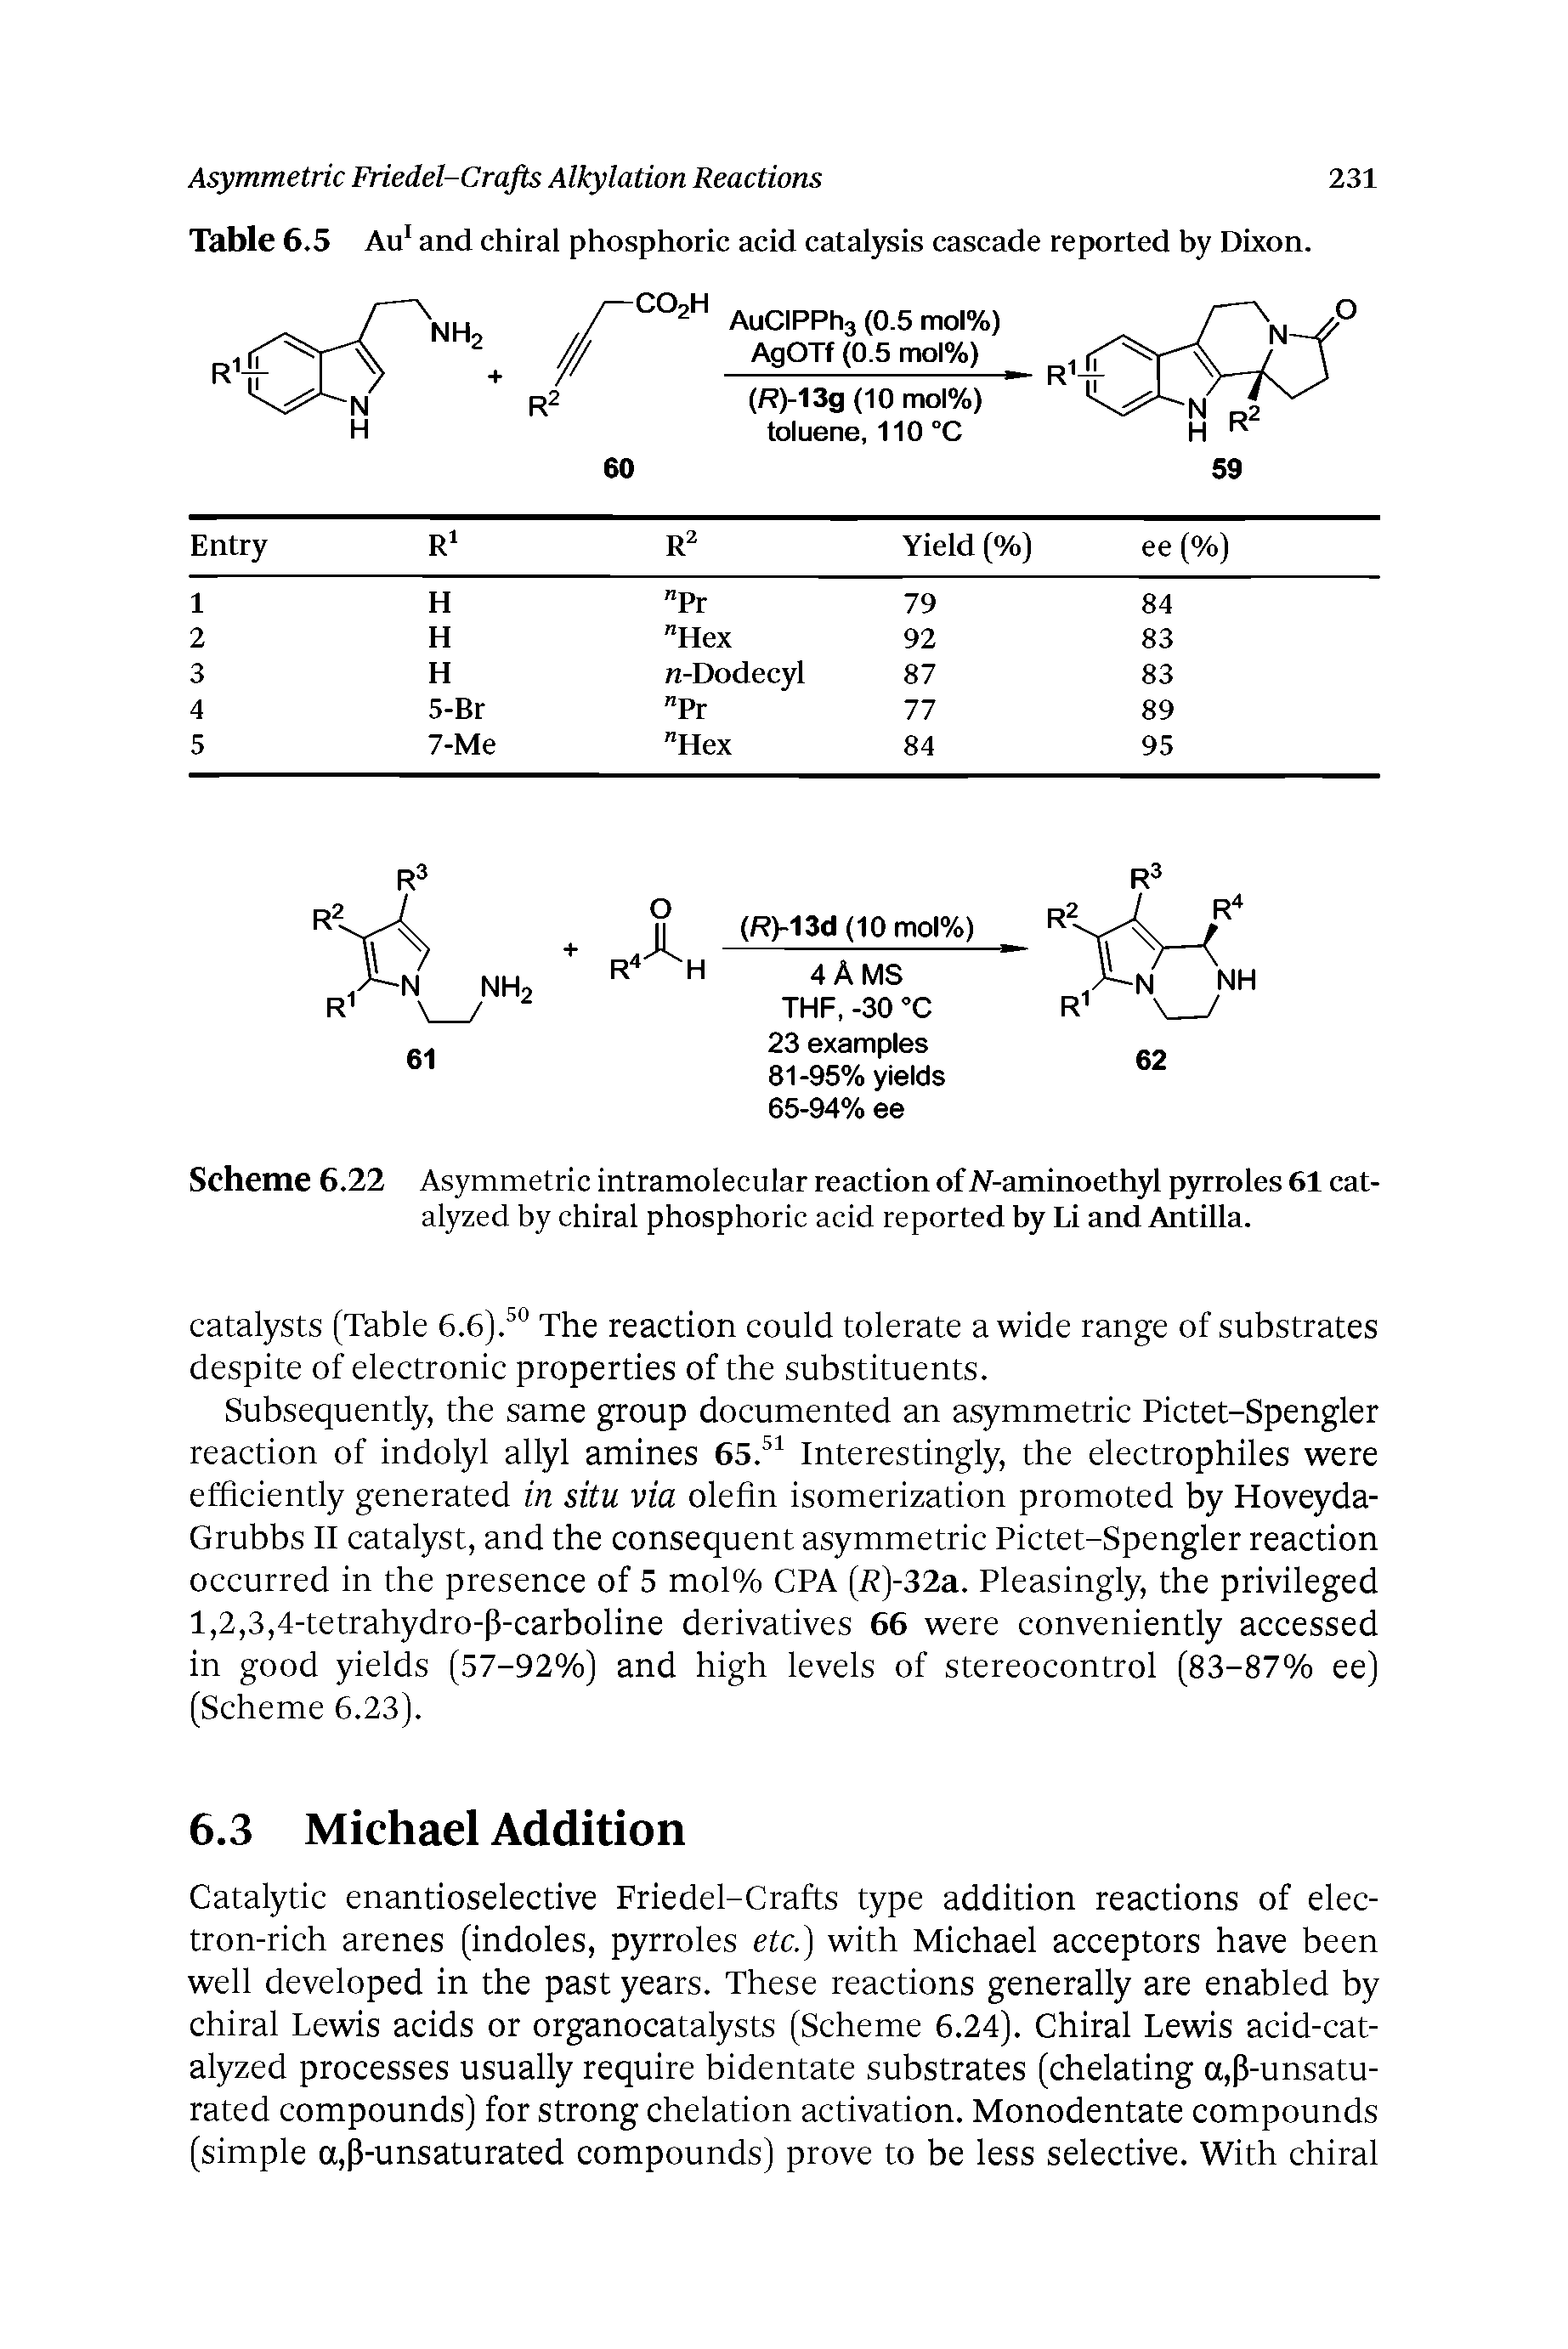 Table 6.5 Au and chiral phosphoric acid catalysis cascade reported by Dixon.